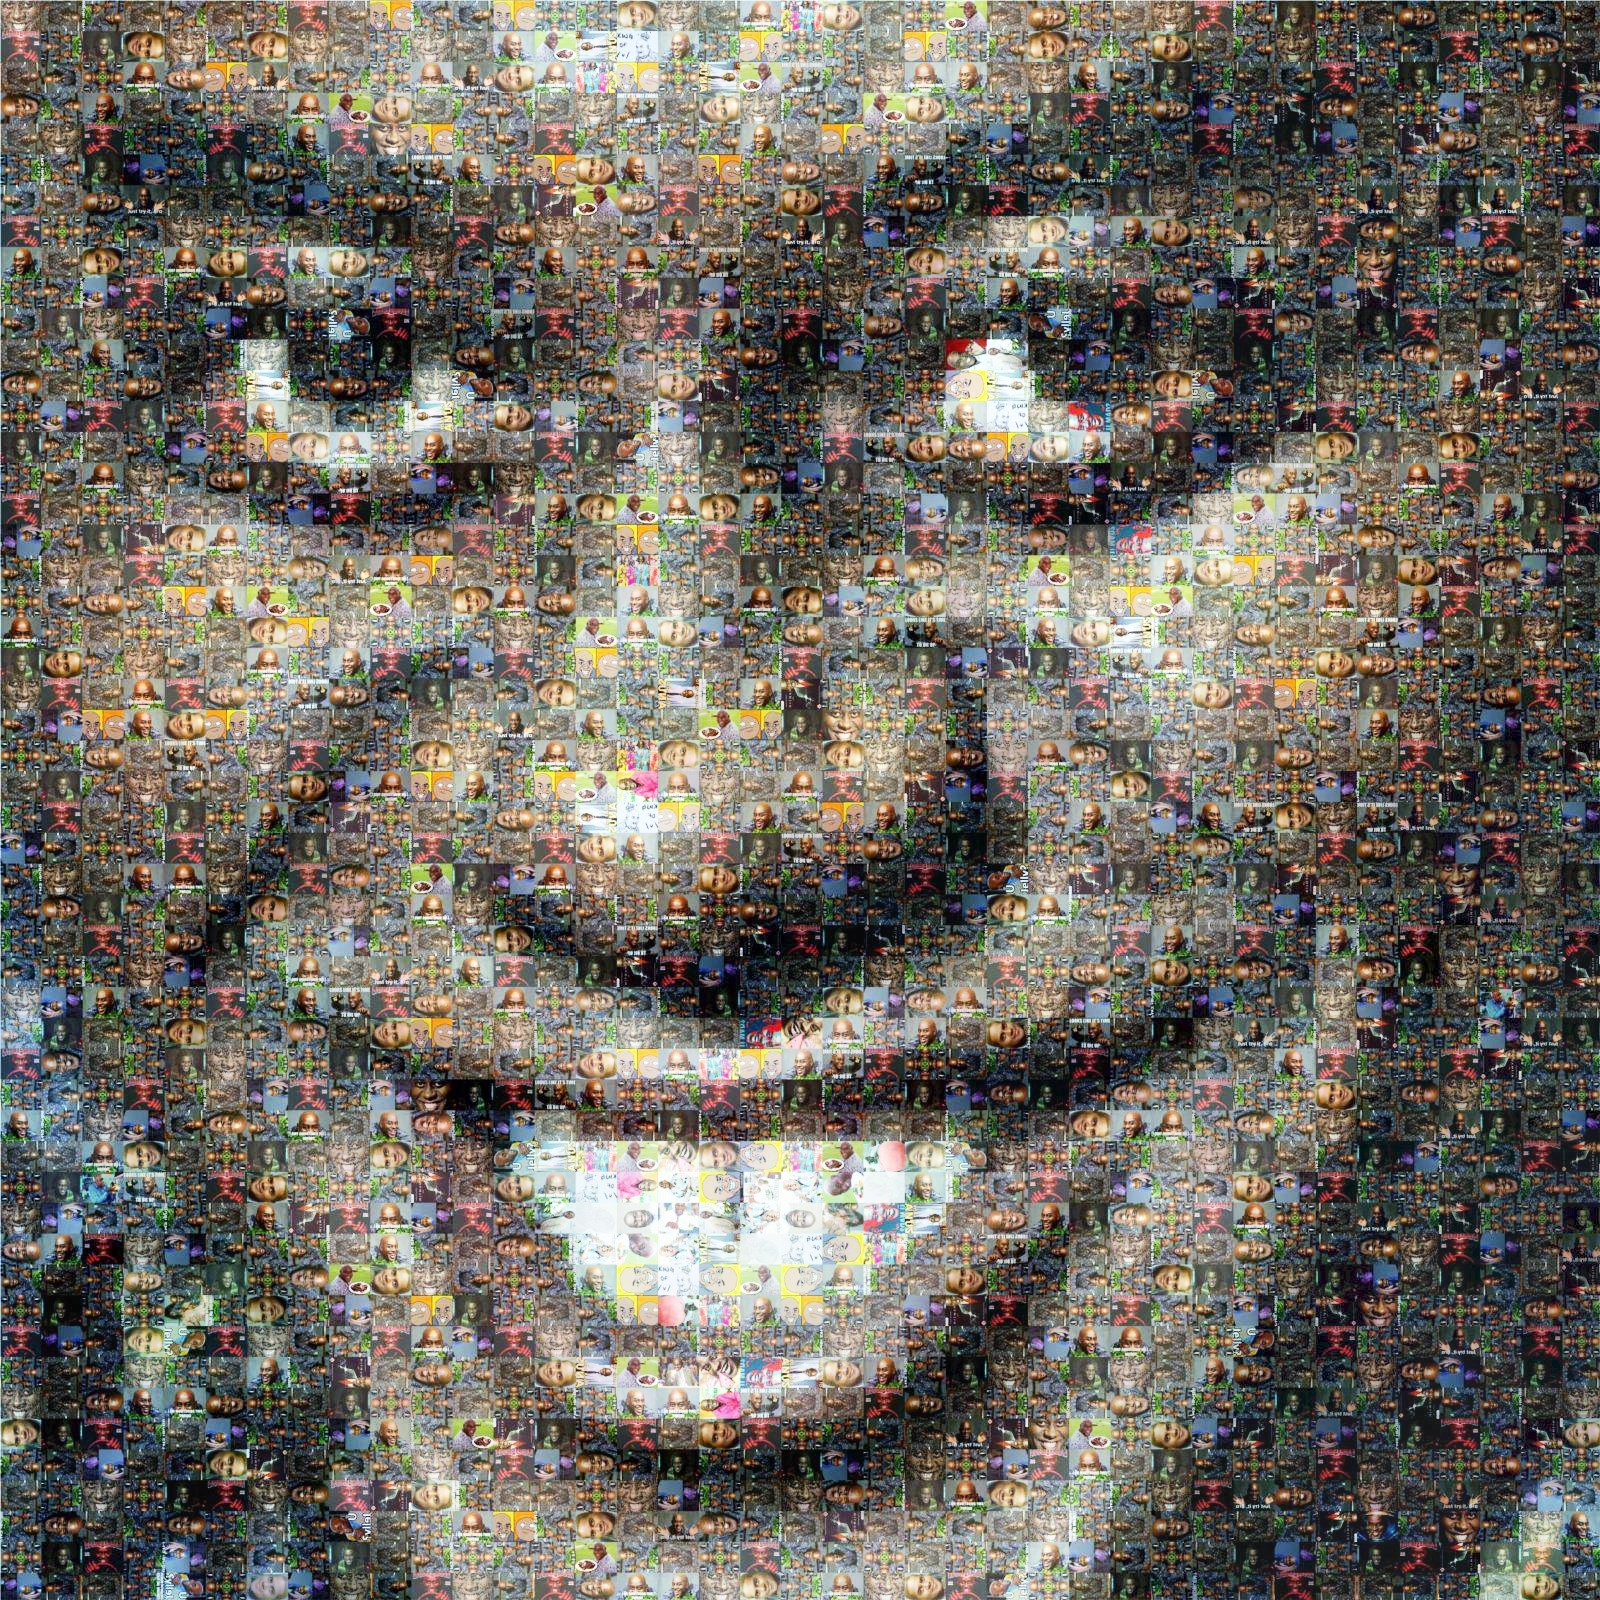 H3h3productions - Ainsley Harriott , HD Wallpaper & Backgrounds